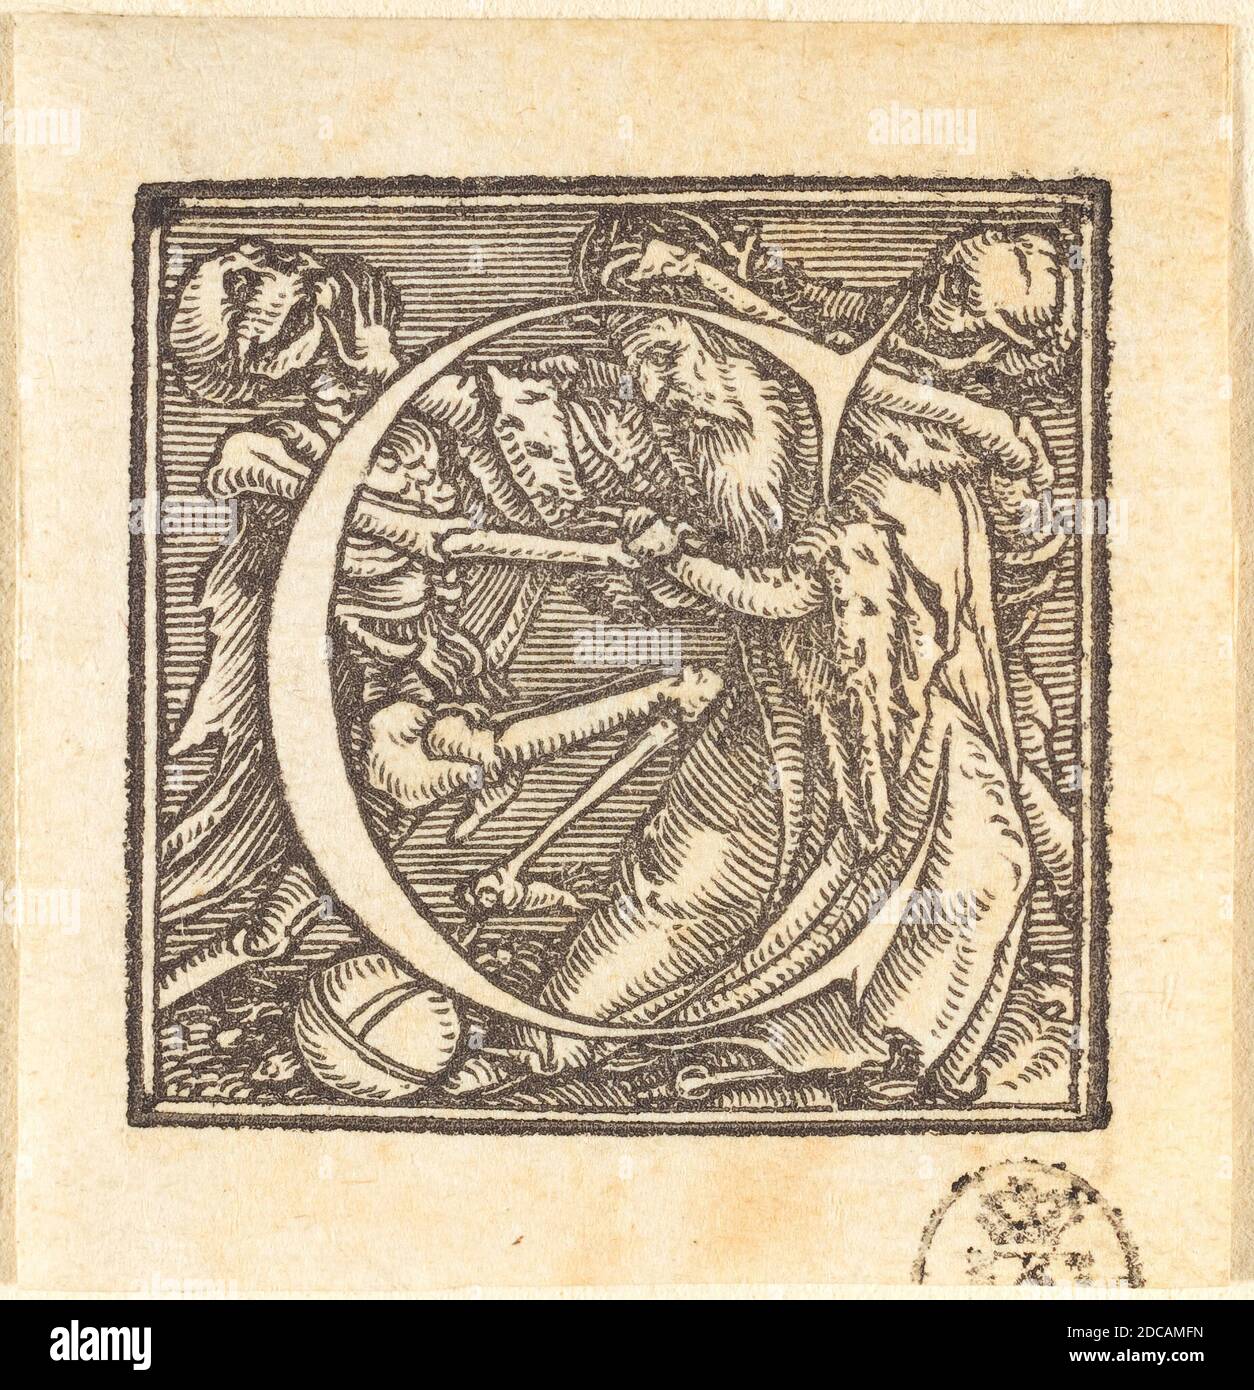 Hans Holbein the Younger, (artist), German, 1497/1498 - 1543, Letter C, Alphabet of Death, (series), woodcut Stock Photo